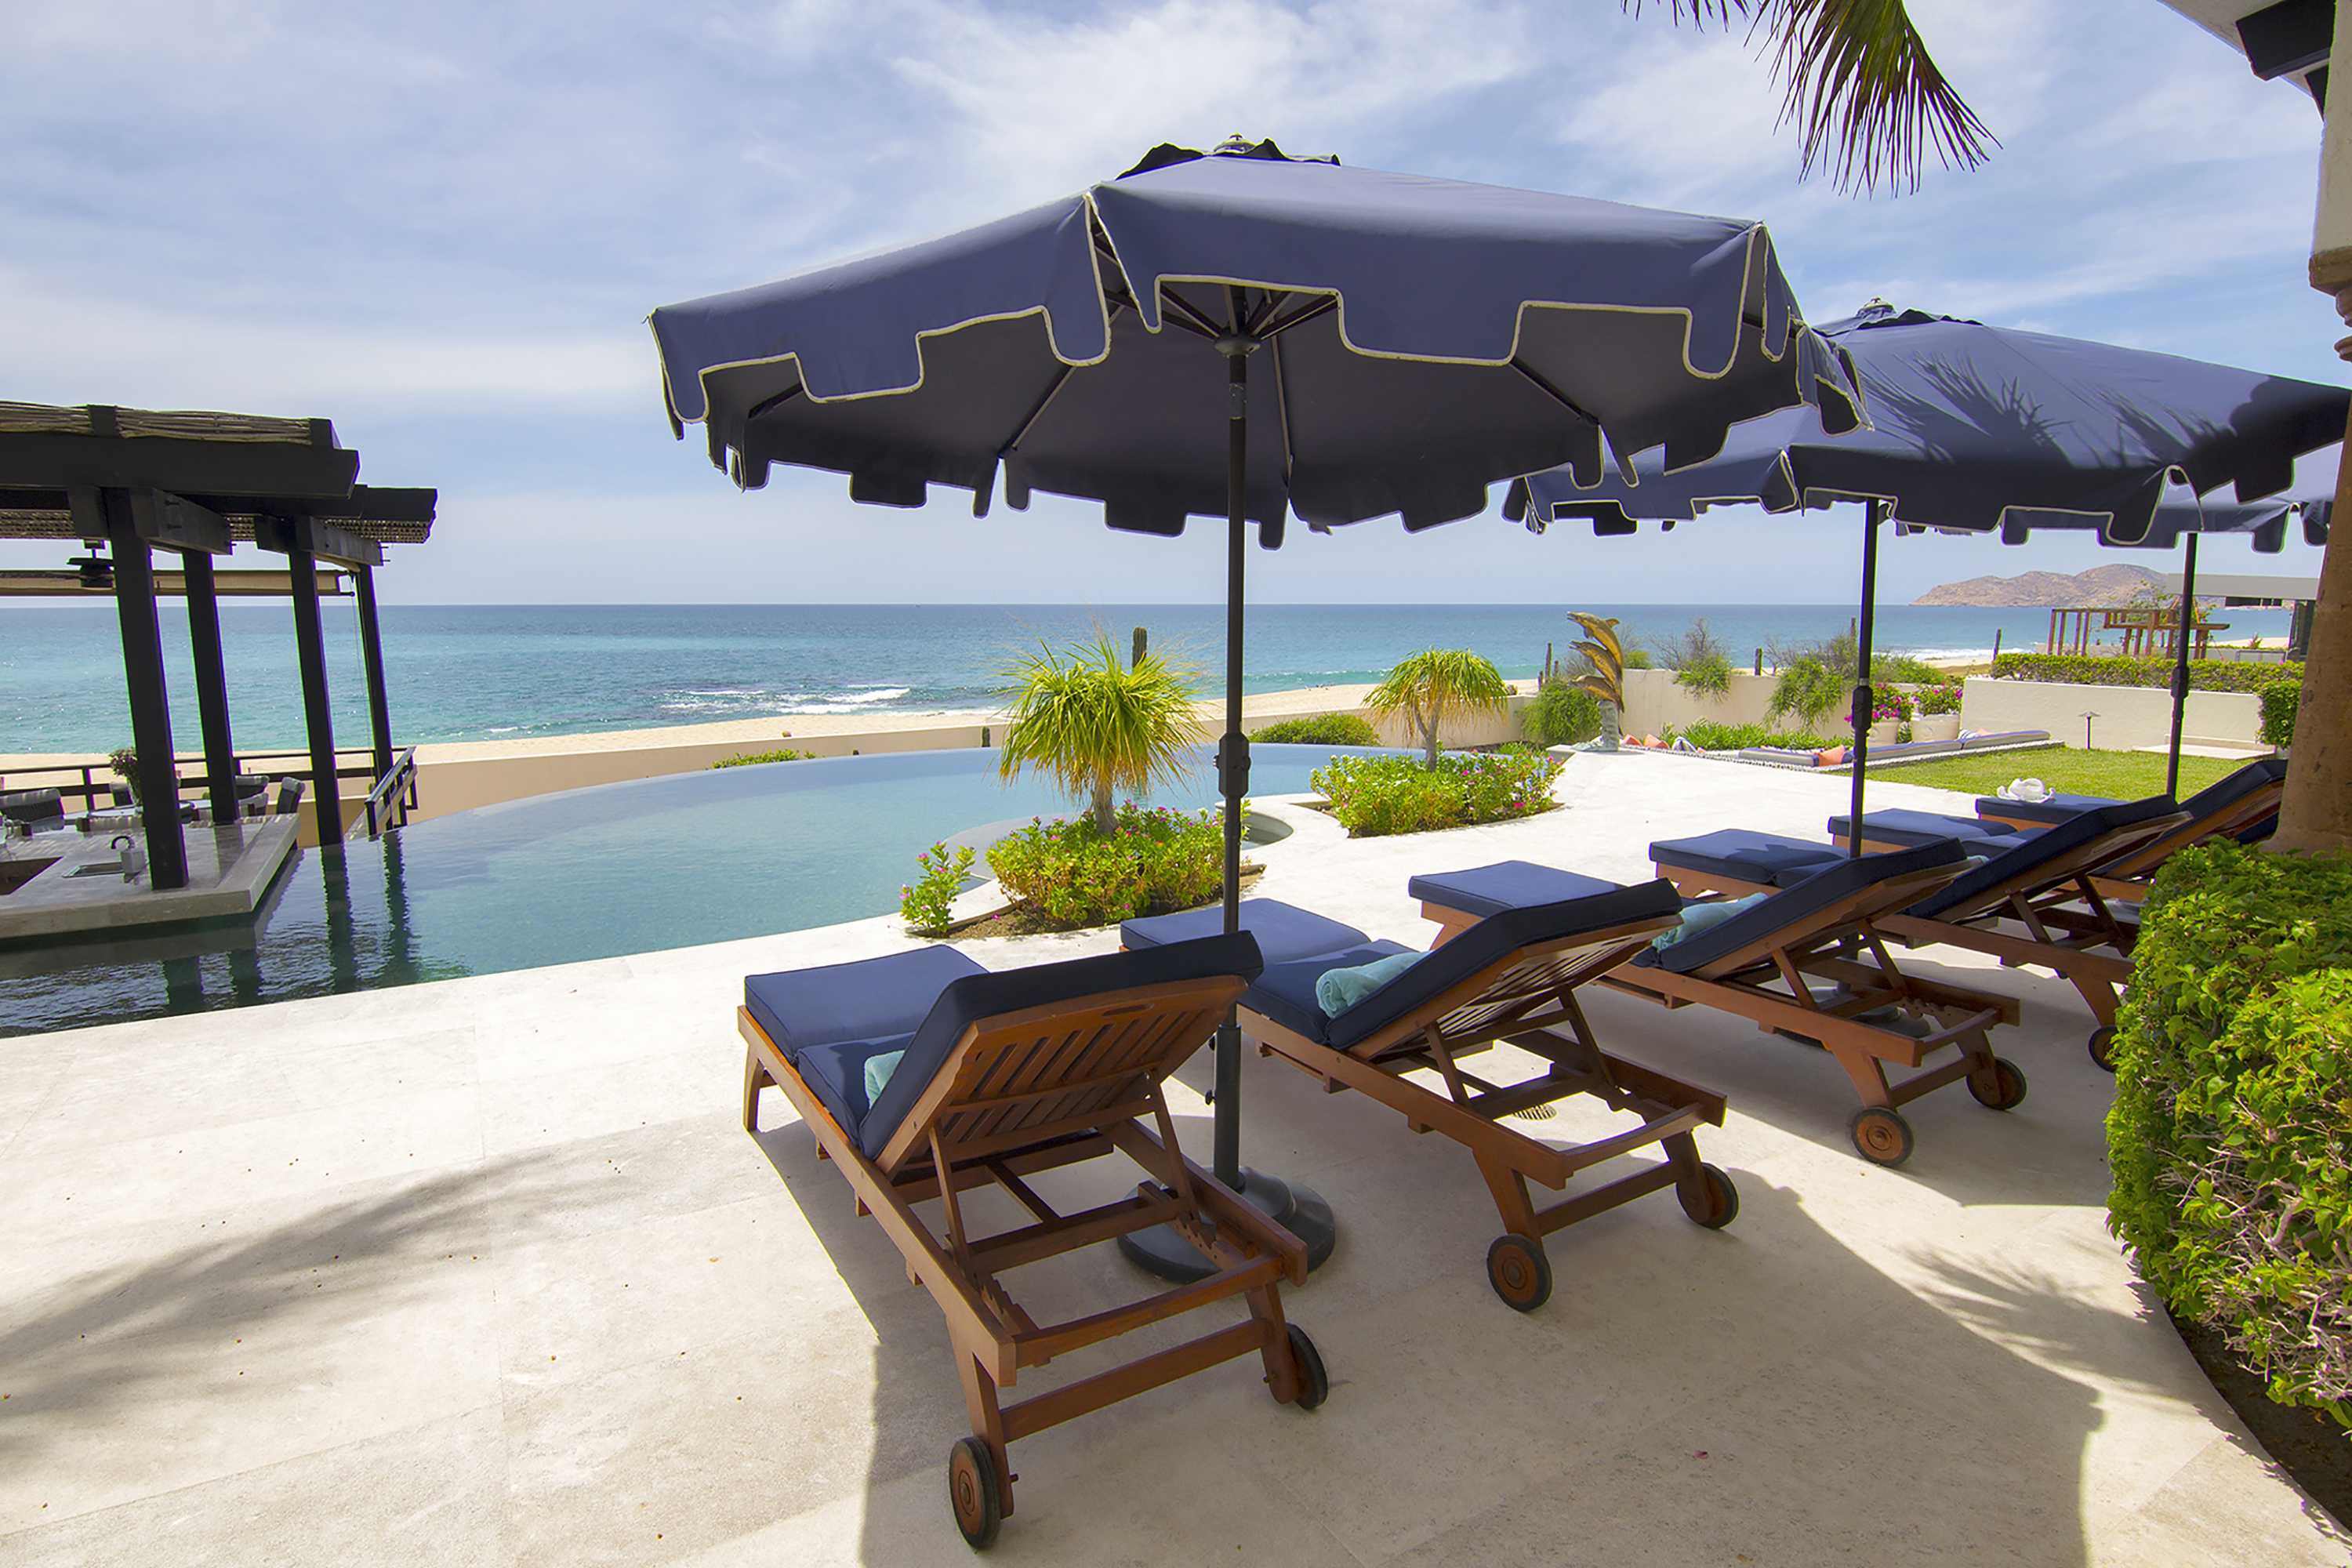 Lounge poolside with a beachfront view